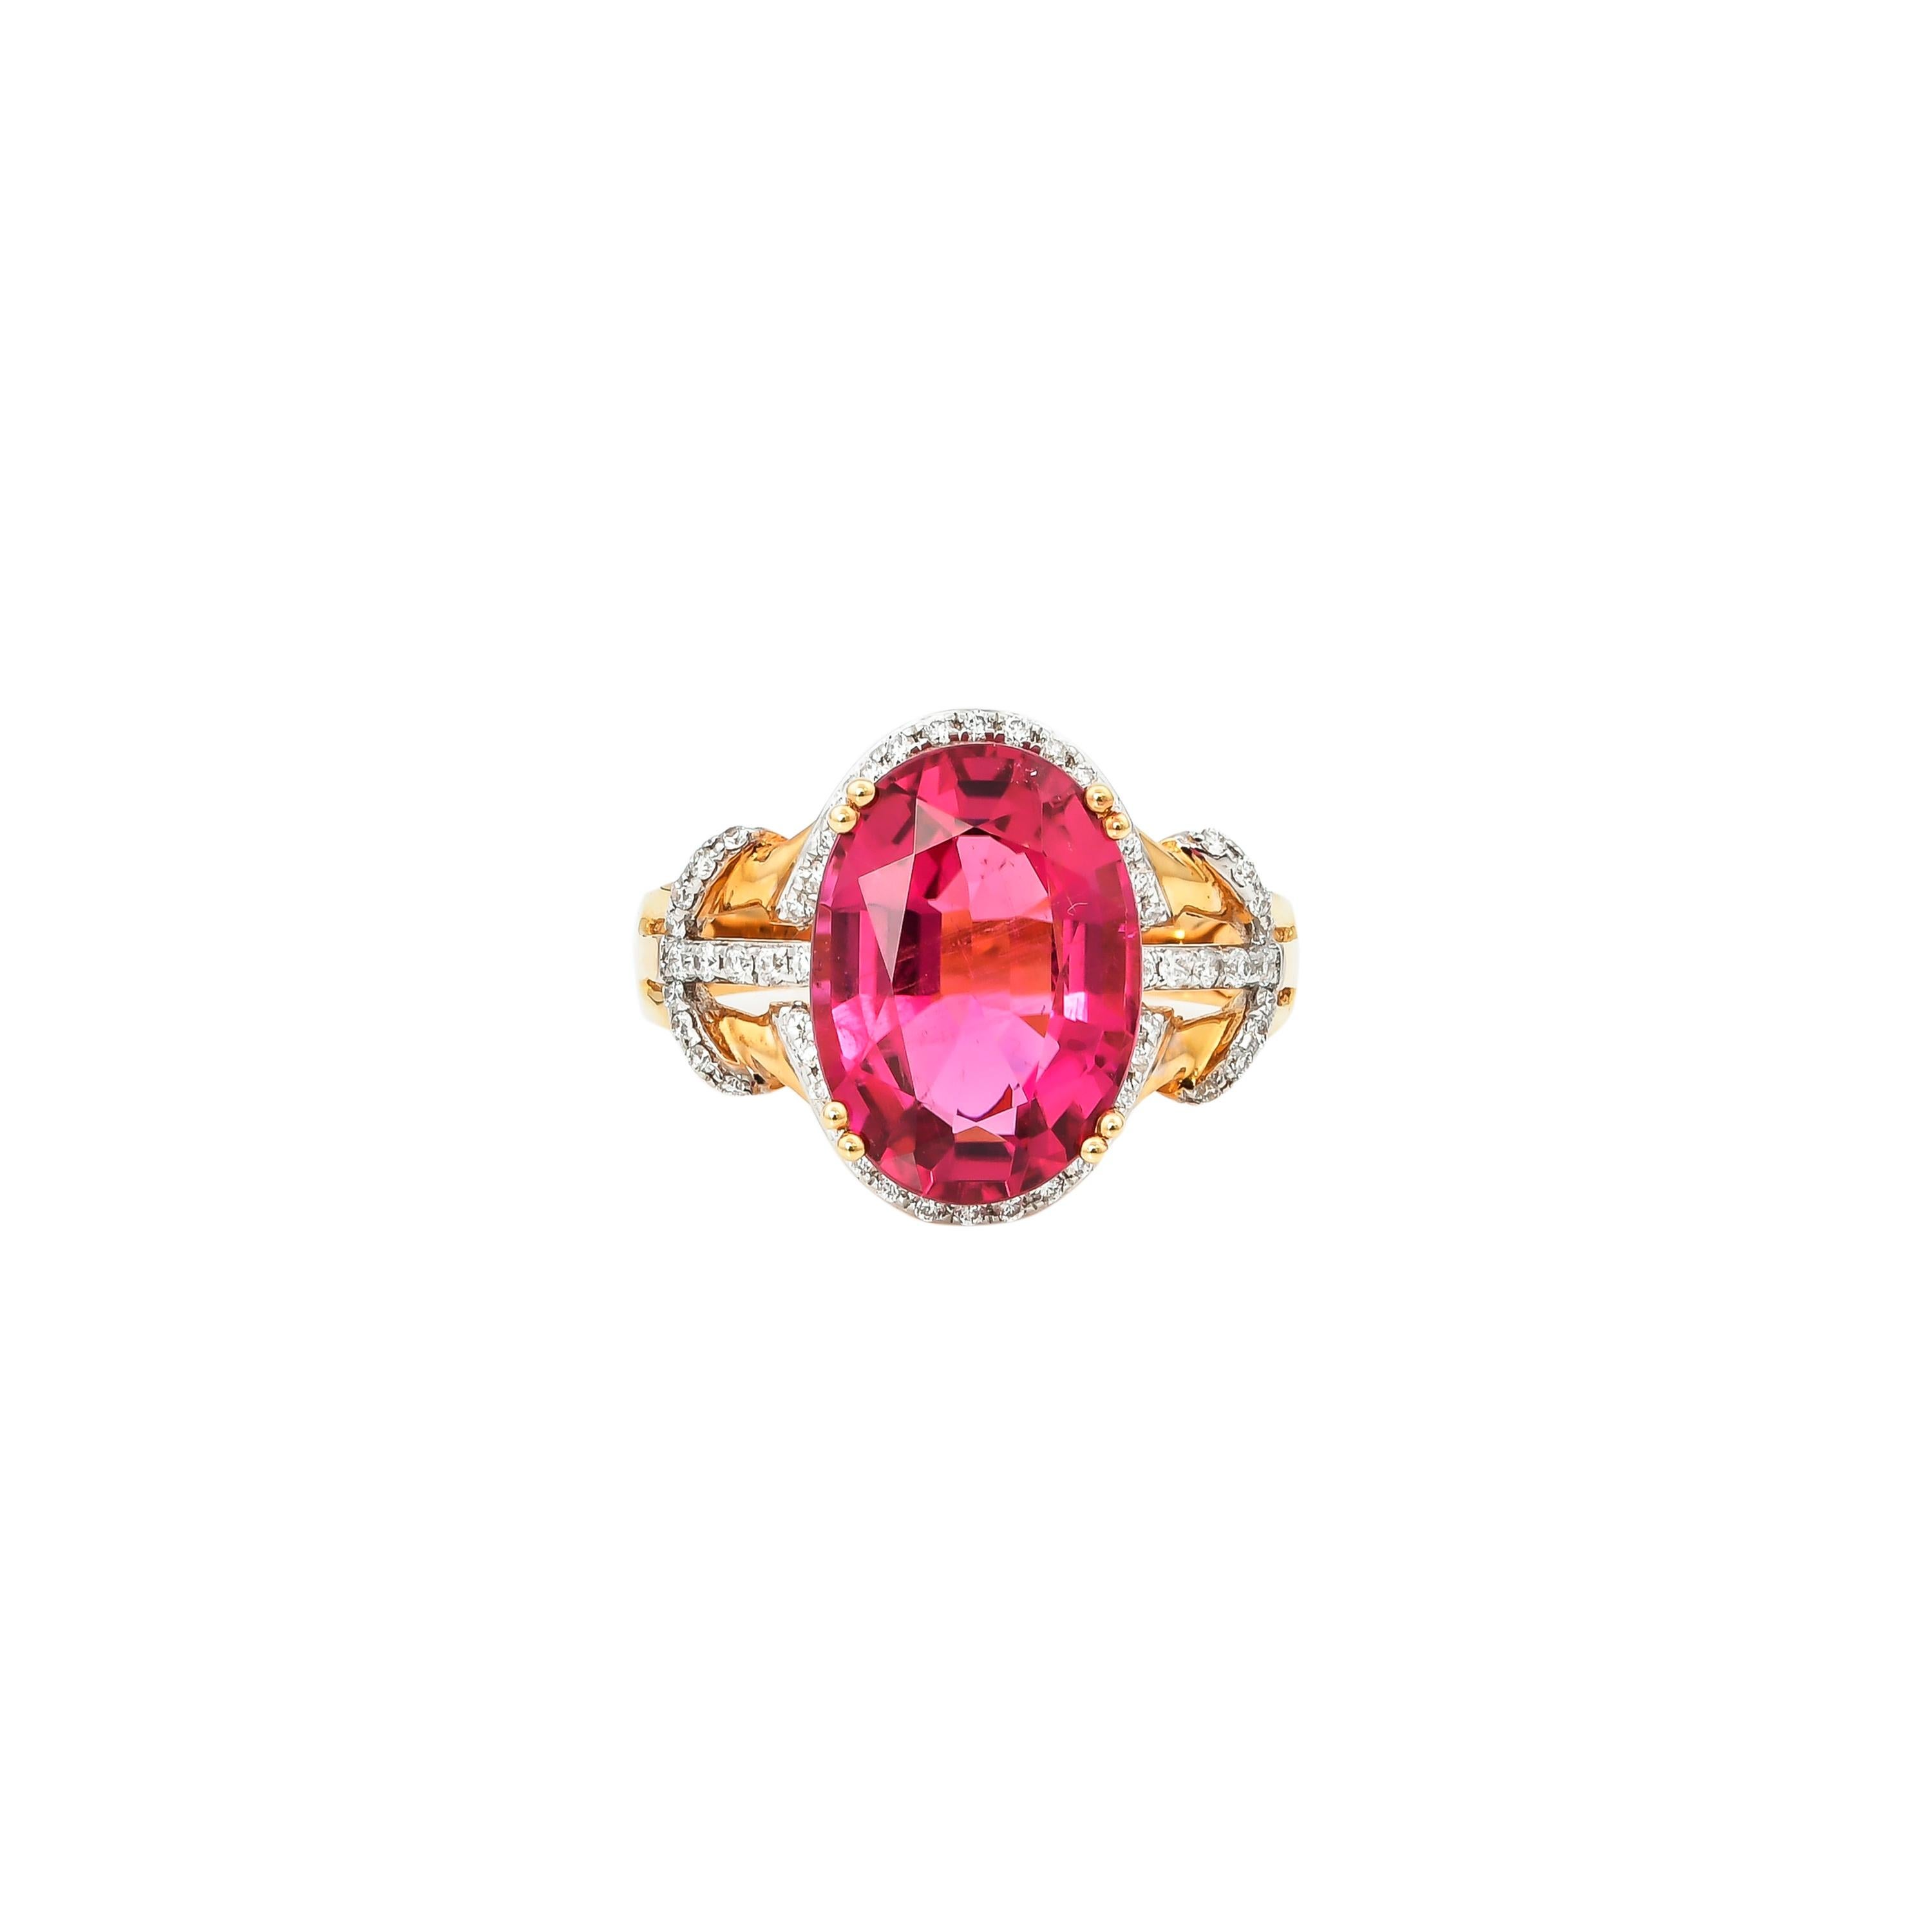 This collection of rings features the most radiant rubelites. These gemstones show a magnificant and regal deep red colour, and the yellow gold and diamond accents makes these pieces a true show stopper. 

Classic rubelite ring in 18K yellow gold